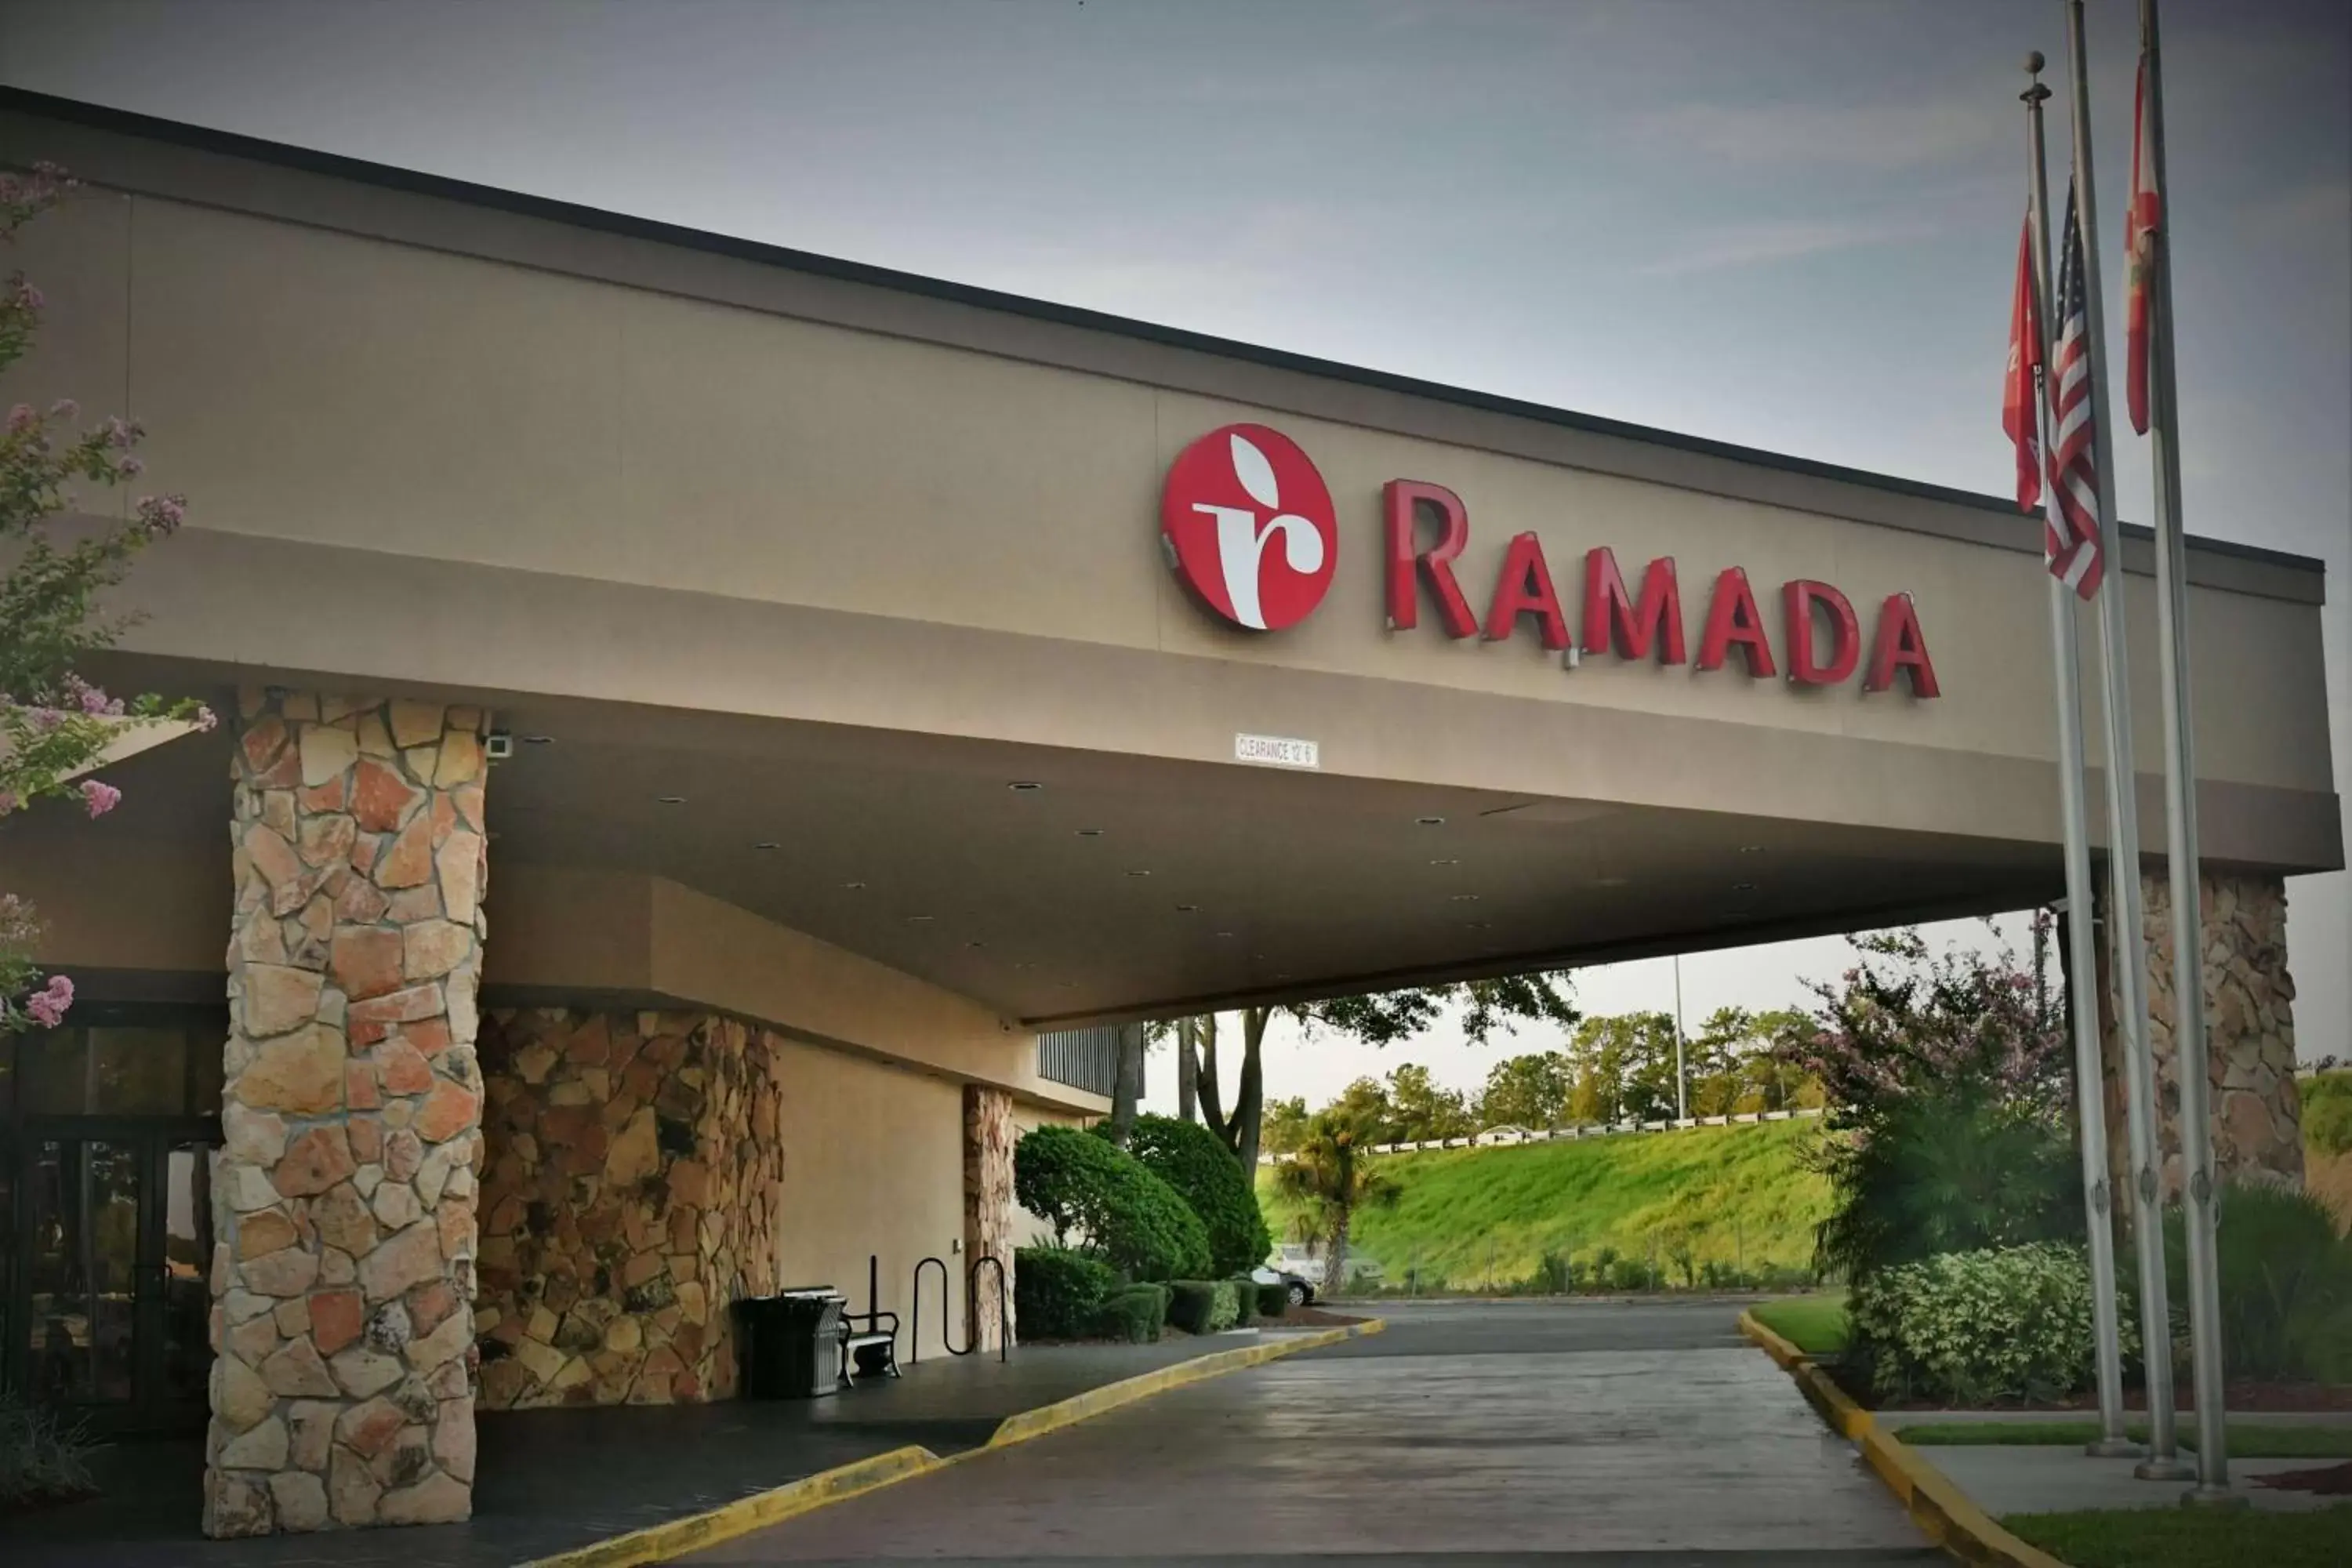 Property building in Ramada by Wyndham Jacksonville Hotel & Conference Center